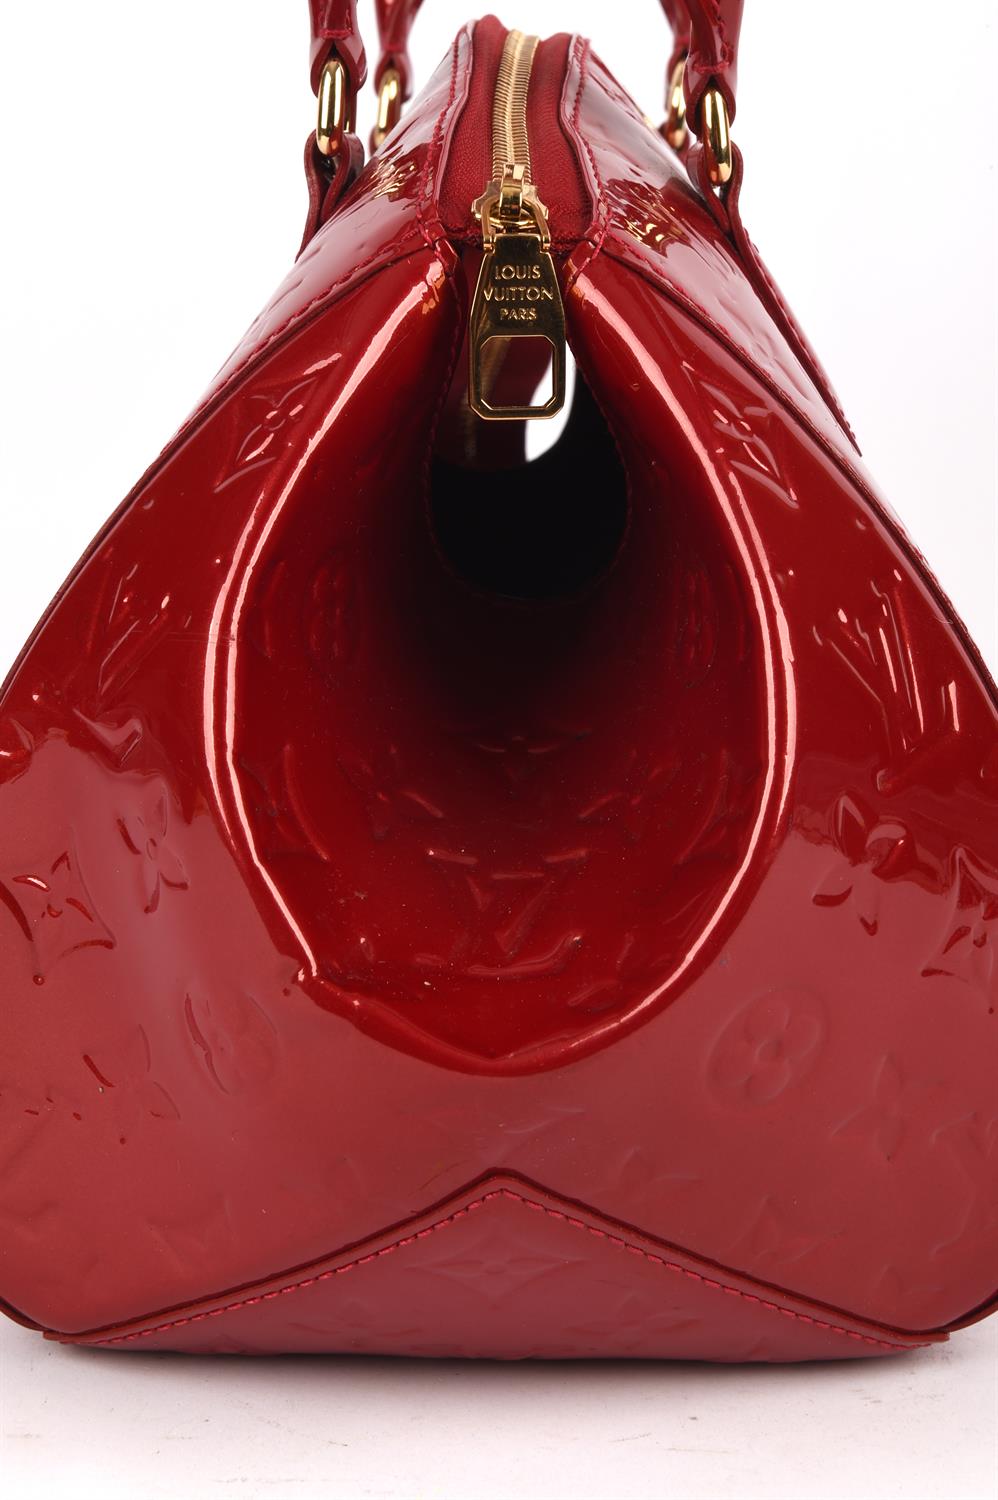 LOUIS VUITTON lipstick red Vernis varnished leather French Montana handbag with gold coloured - Image 4 of 8